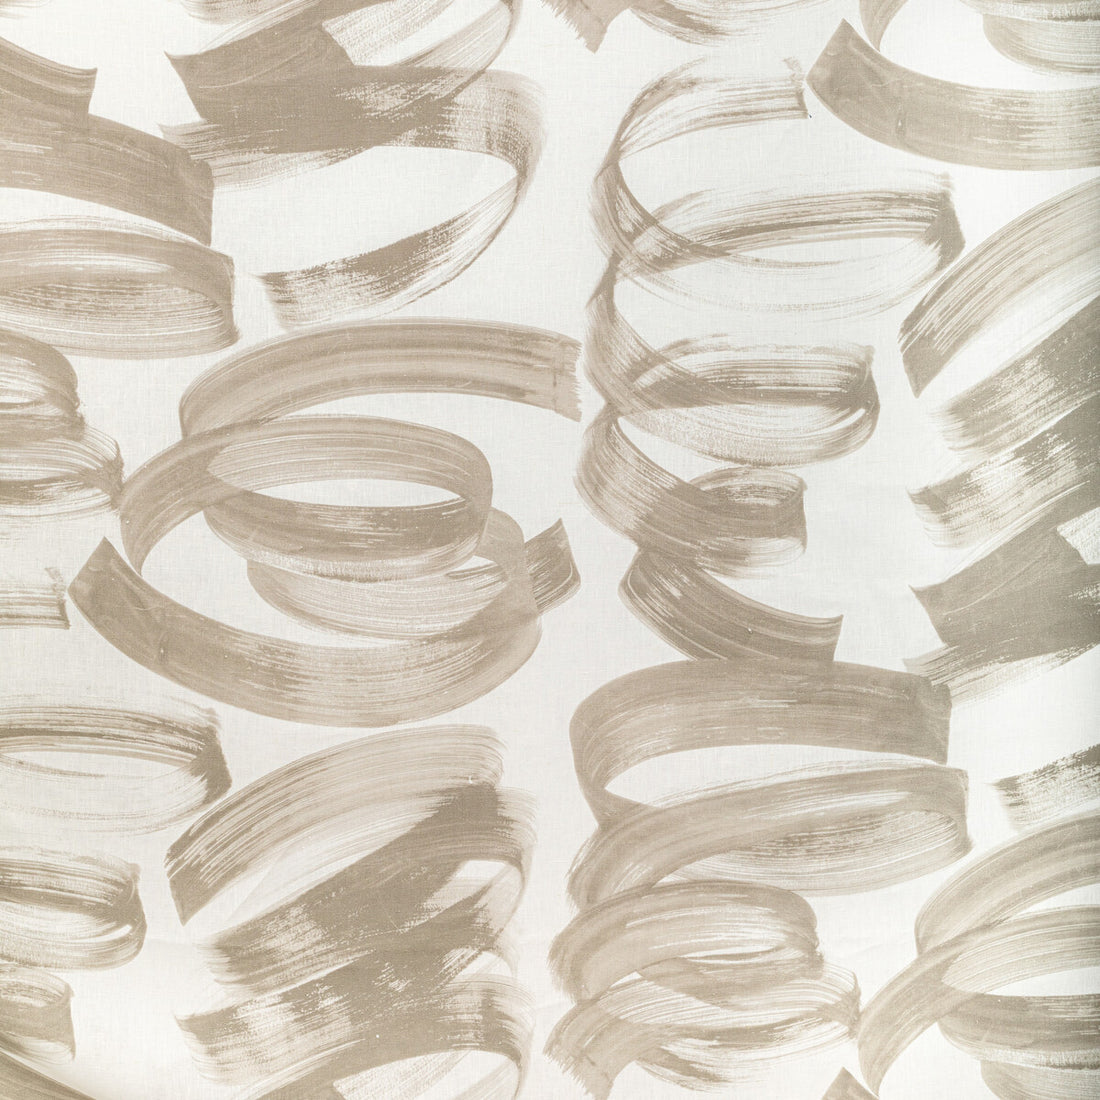 Laryo Print fabric in sand color - pattern GWF-3773.16.0 - by Lee Jofa Modern in the Rhapsody collection